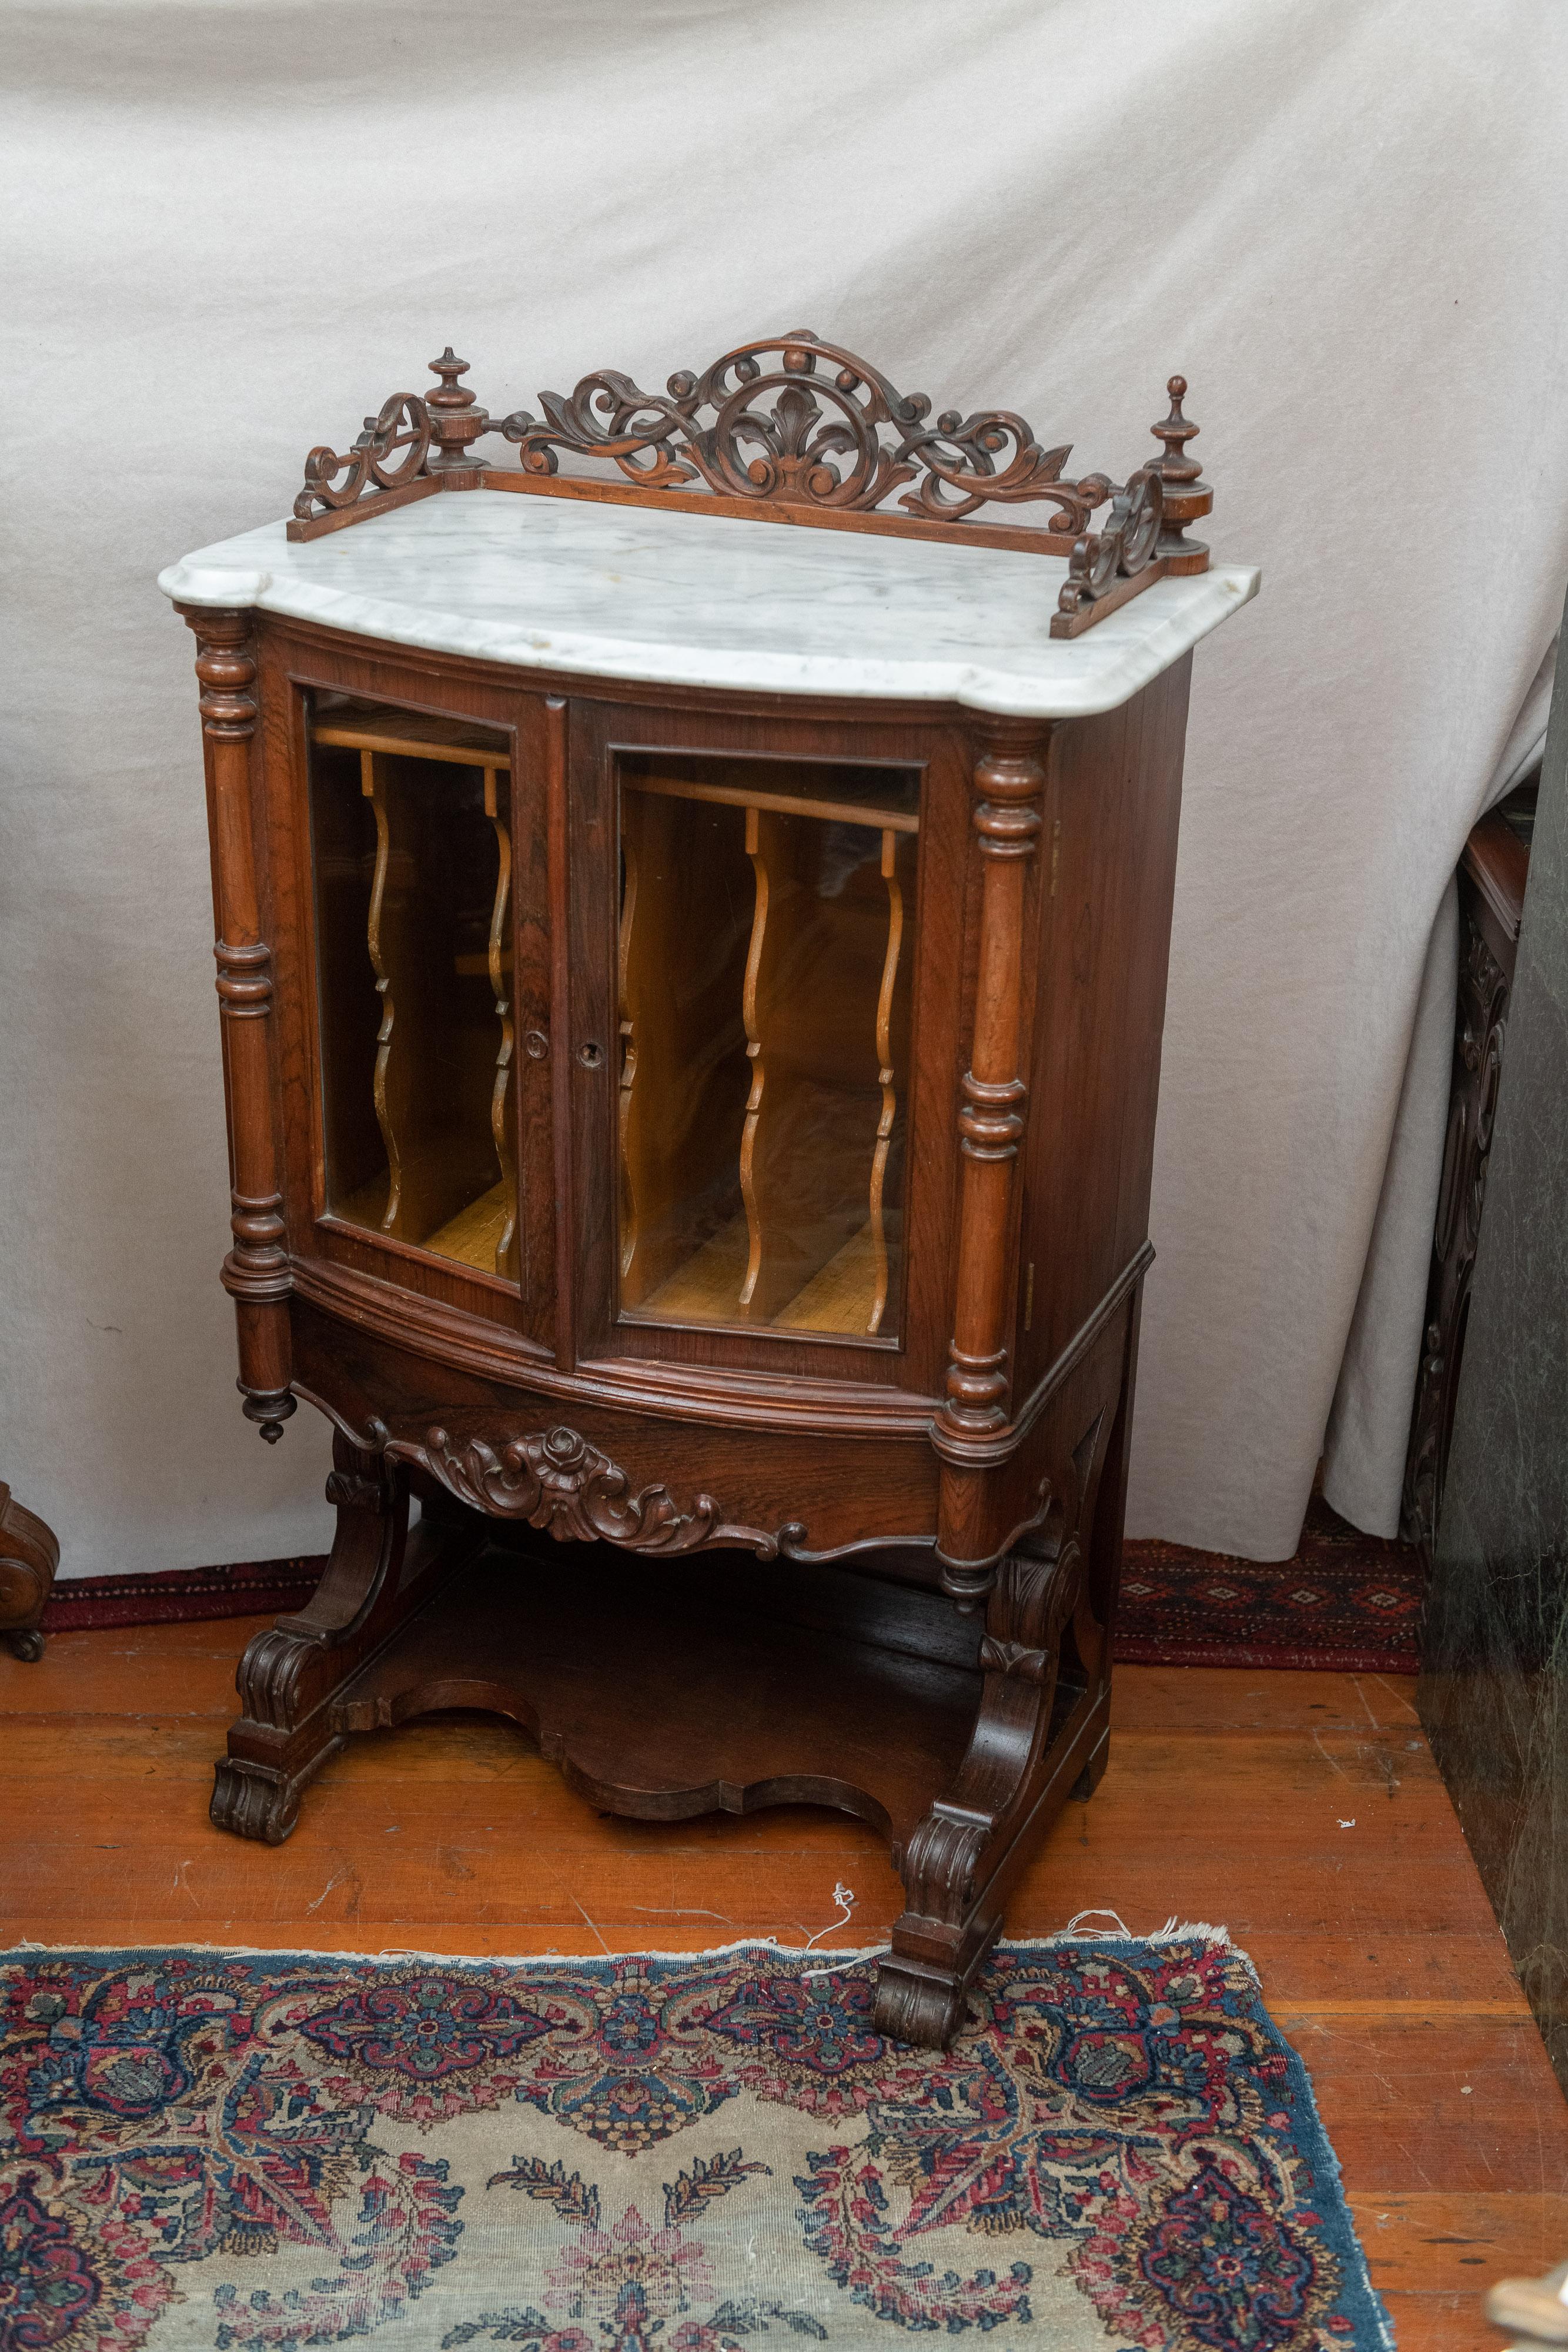 This is certainly one of the nicer music cabinets ever made. Handsome rosewood and white marble make this cabinet a fine example. This is American Rococo design and therefore made in the 1860's. Rosewood is one of the most beautiful and sought after